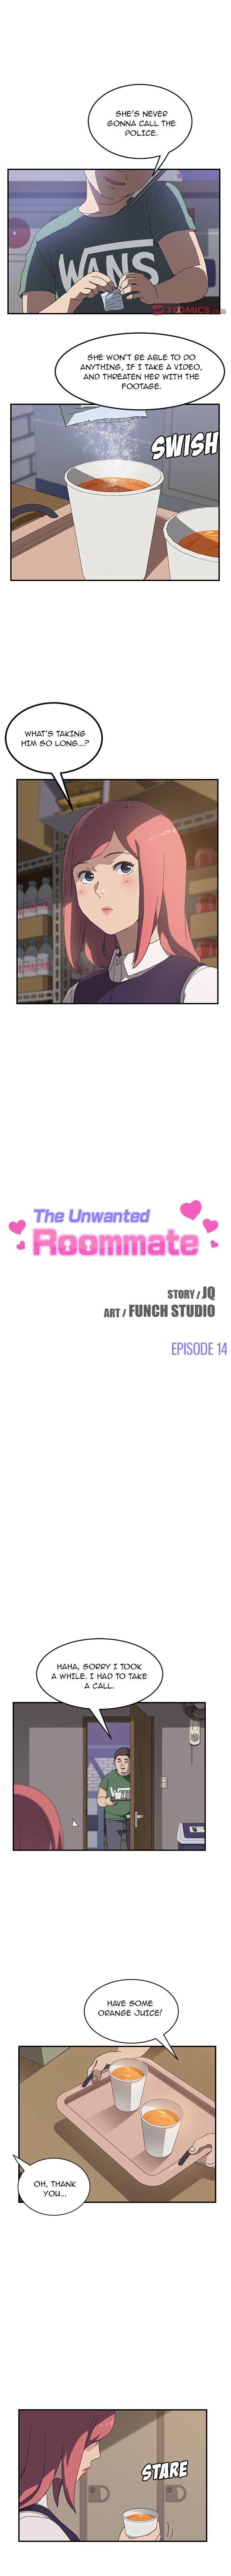 The Unwanted Roommate 131